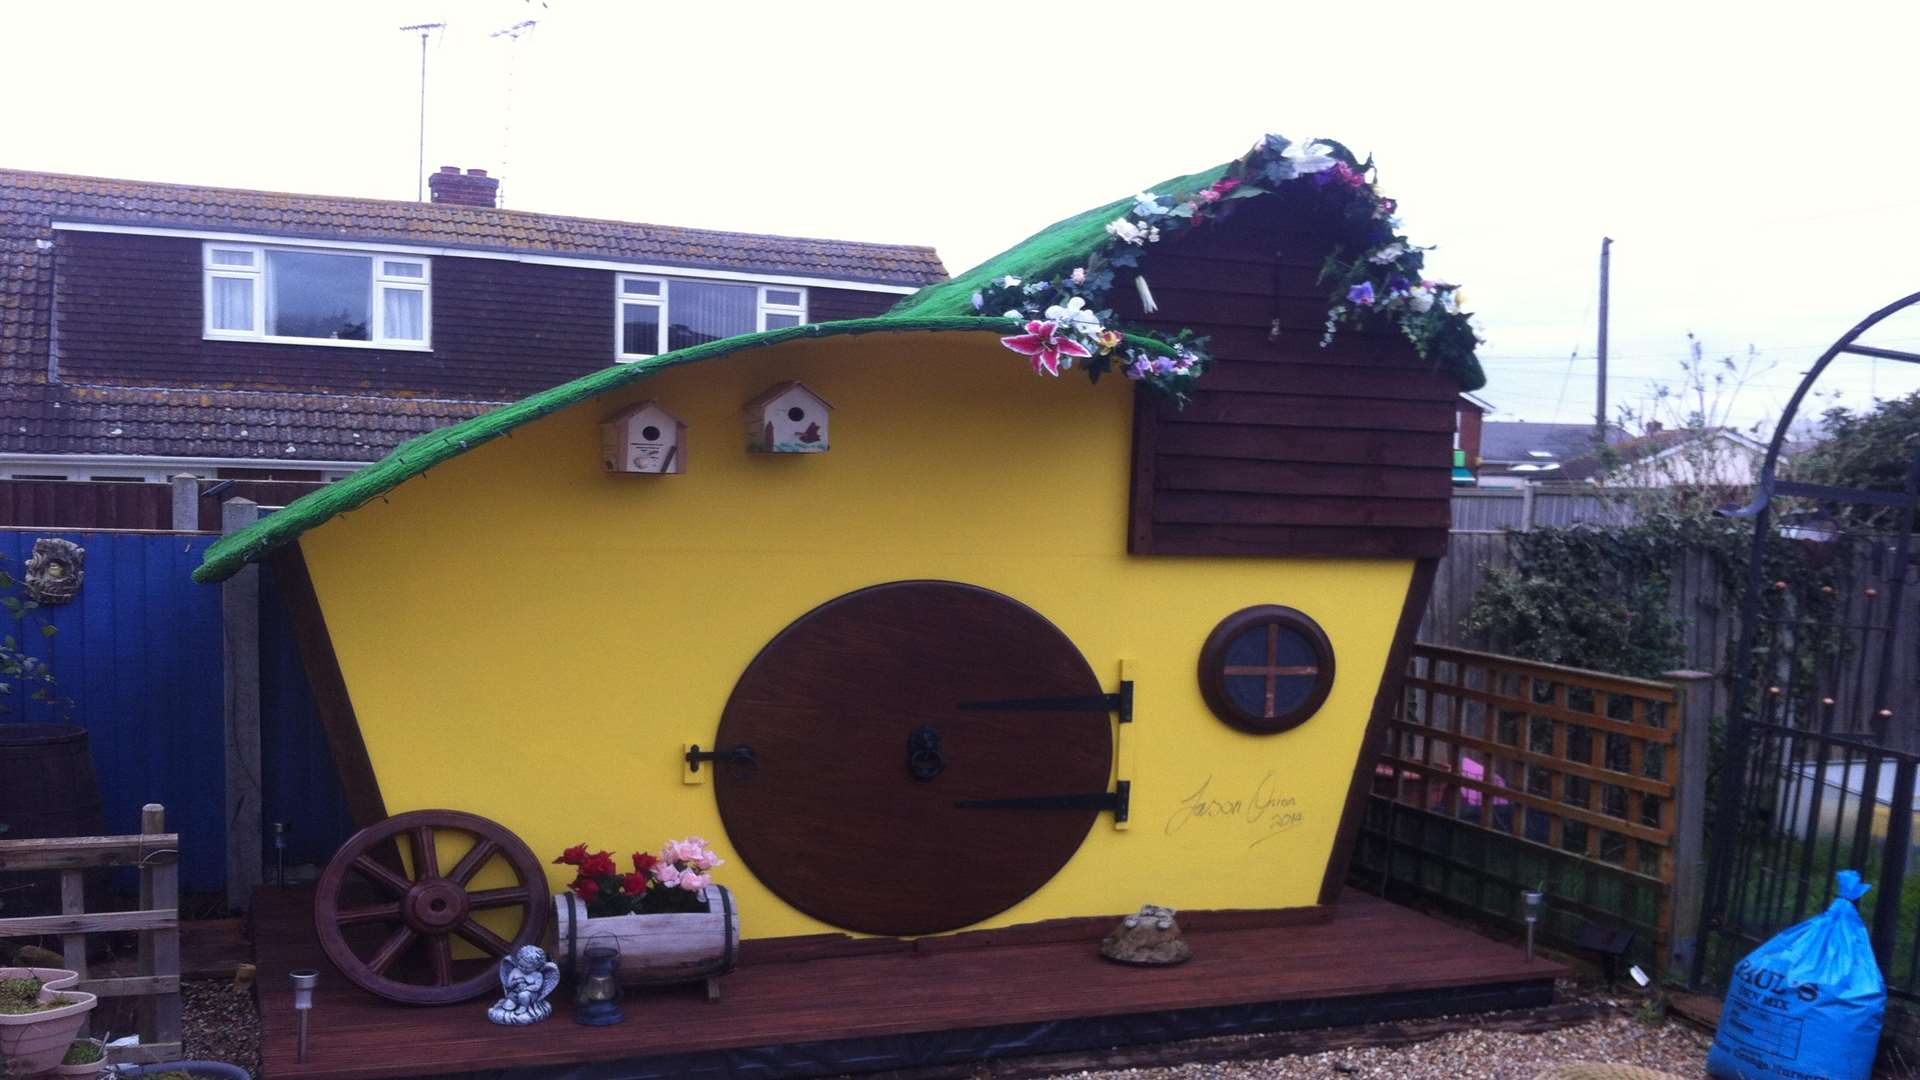 A hobbit house was built in the back garden.